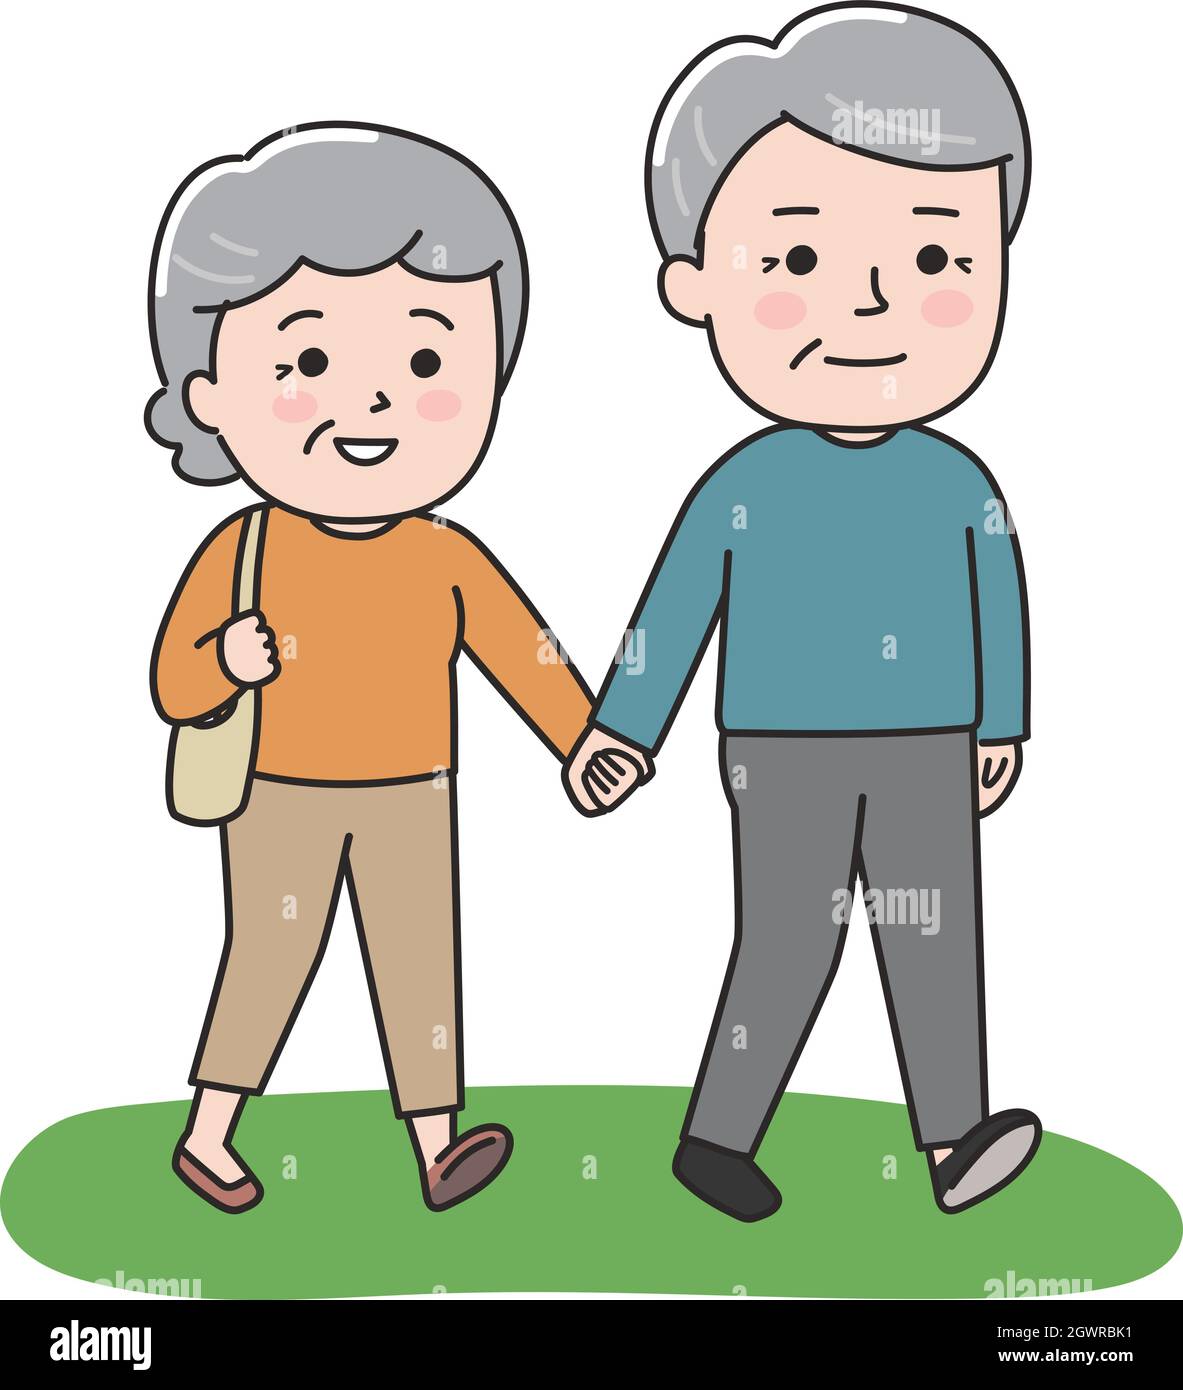 The elderly couple happily walked hand in hand. Vector illustration on a white background. Stock Vector